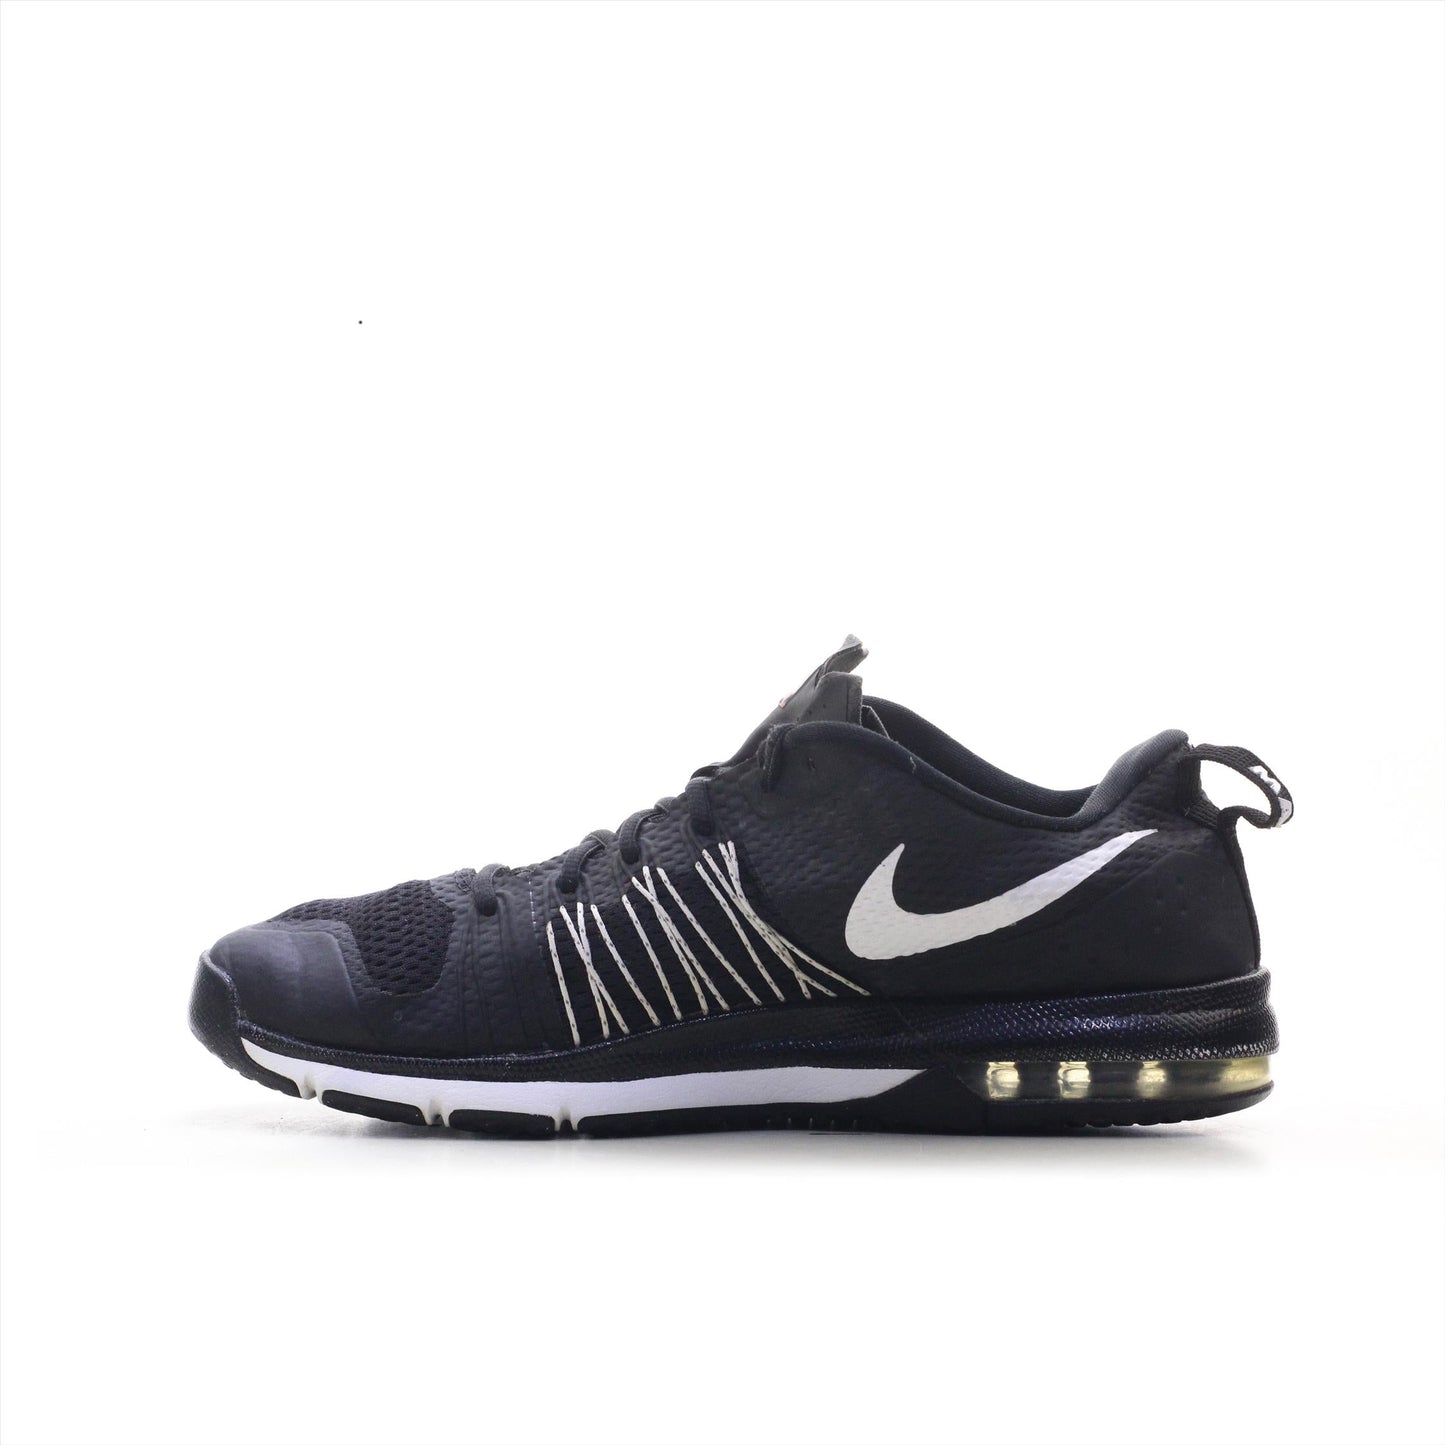 NIKE AIR MAX EFFORT FLYWIRE (Original USA Imported)